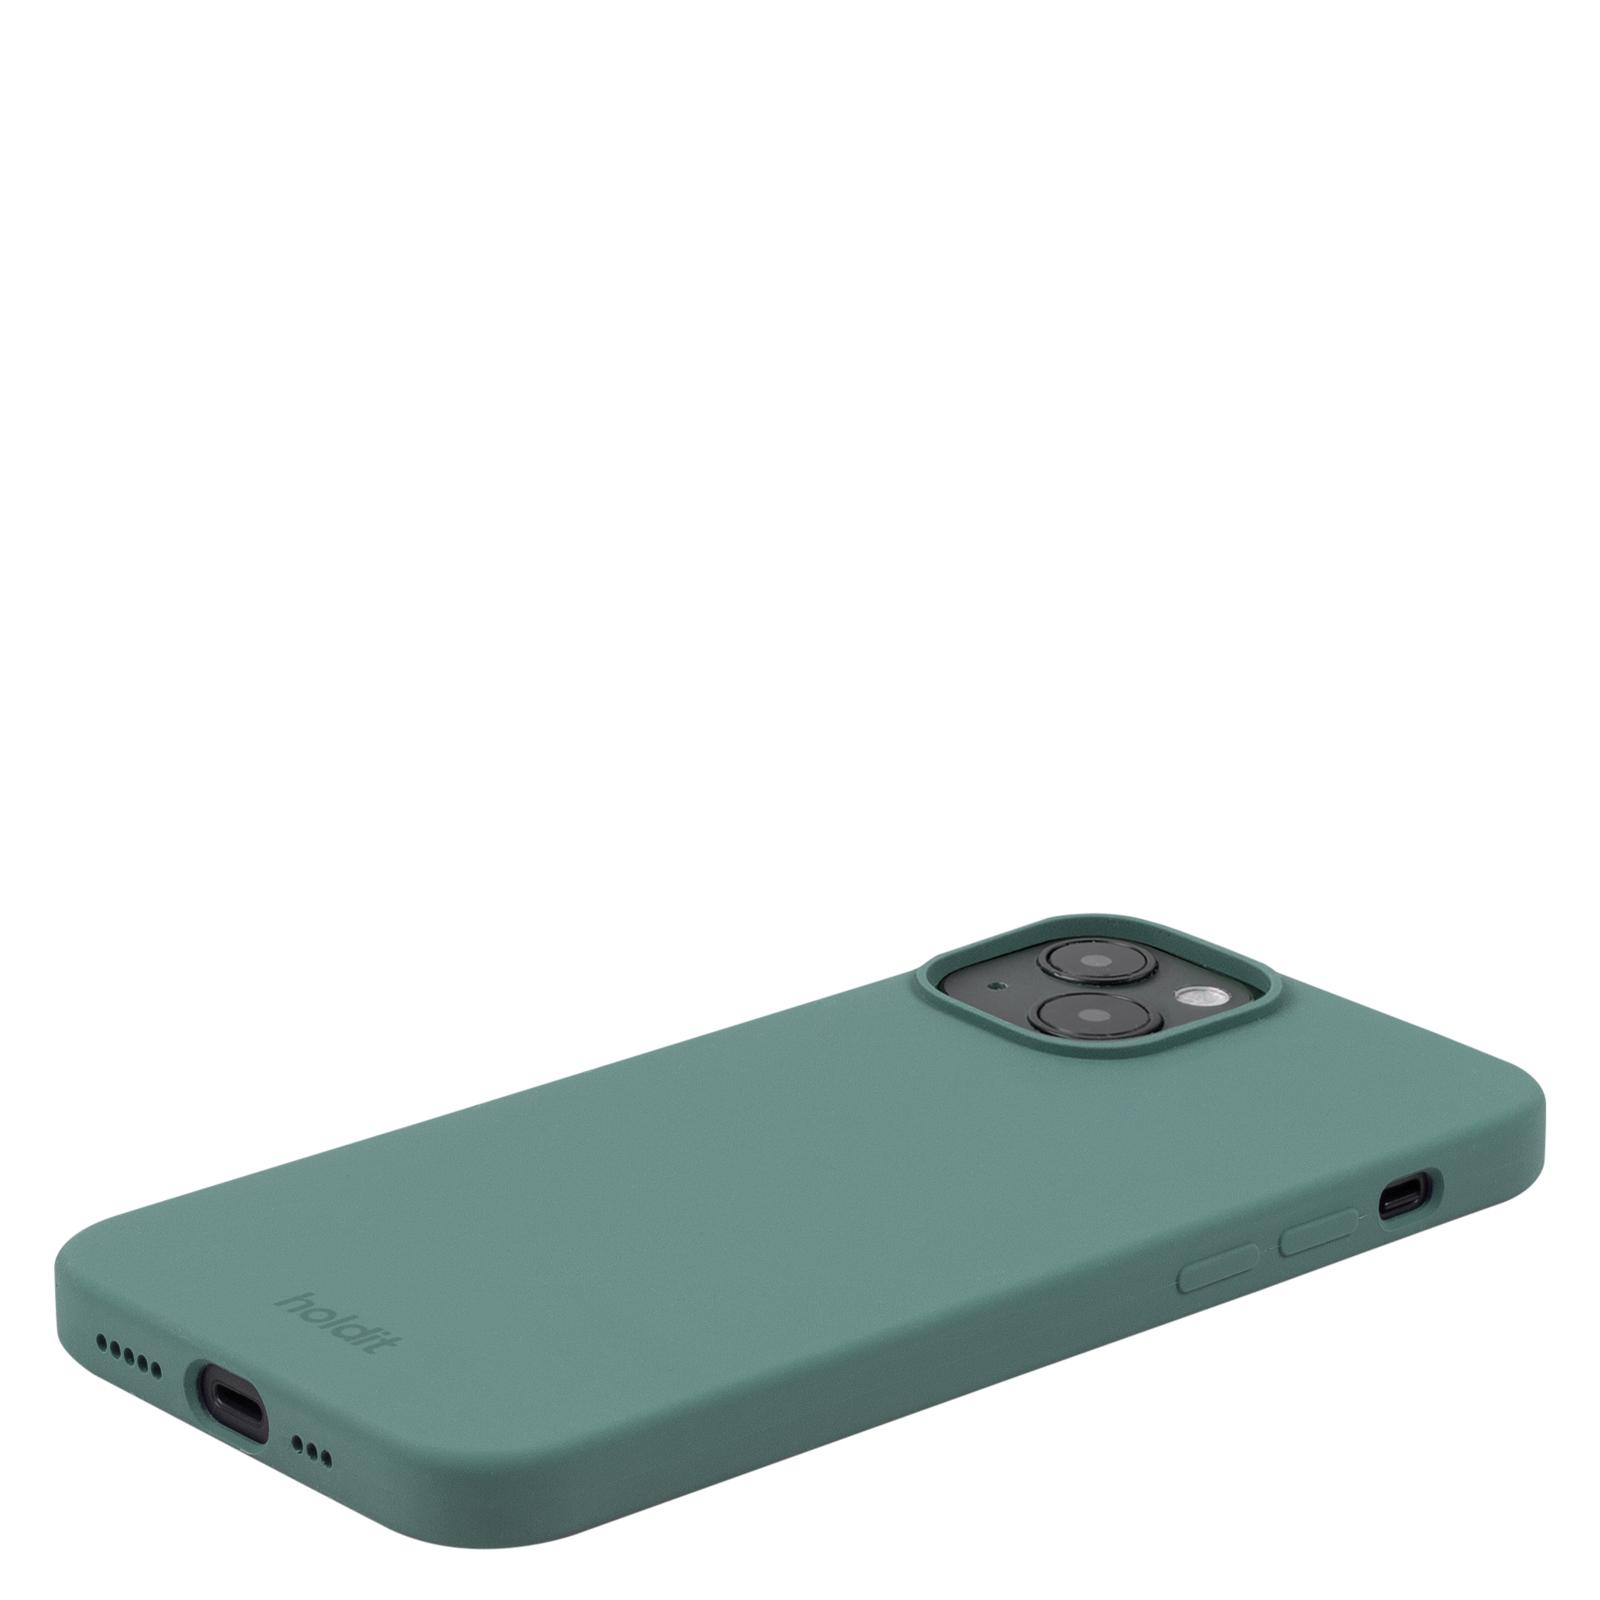 Case, Apple, Backcover, HOLDIT 14/13, Moss Green iPhone Silicone